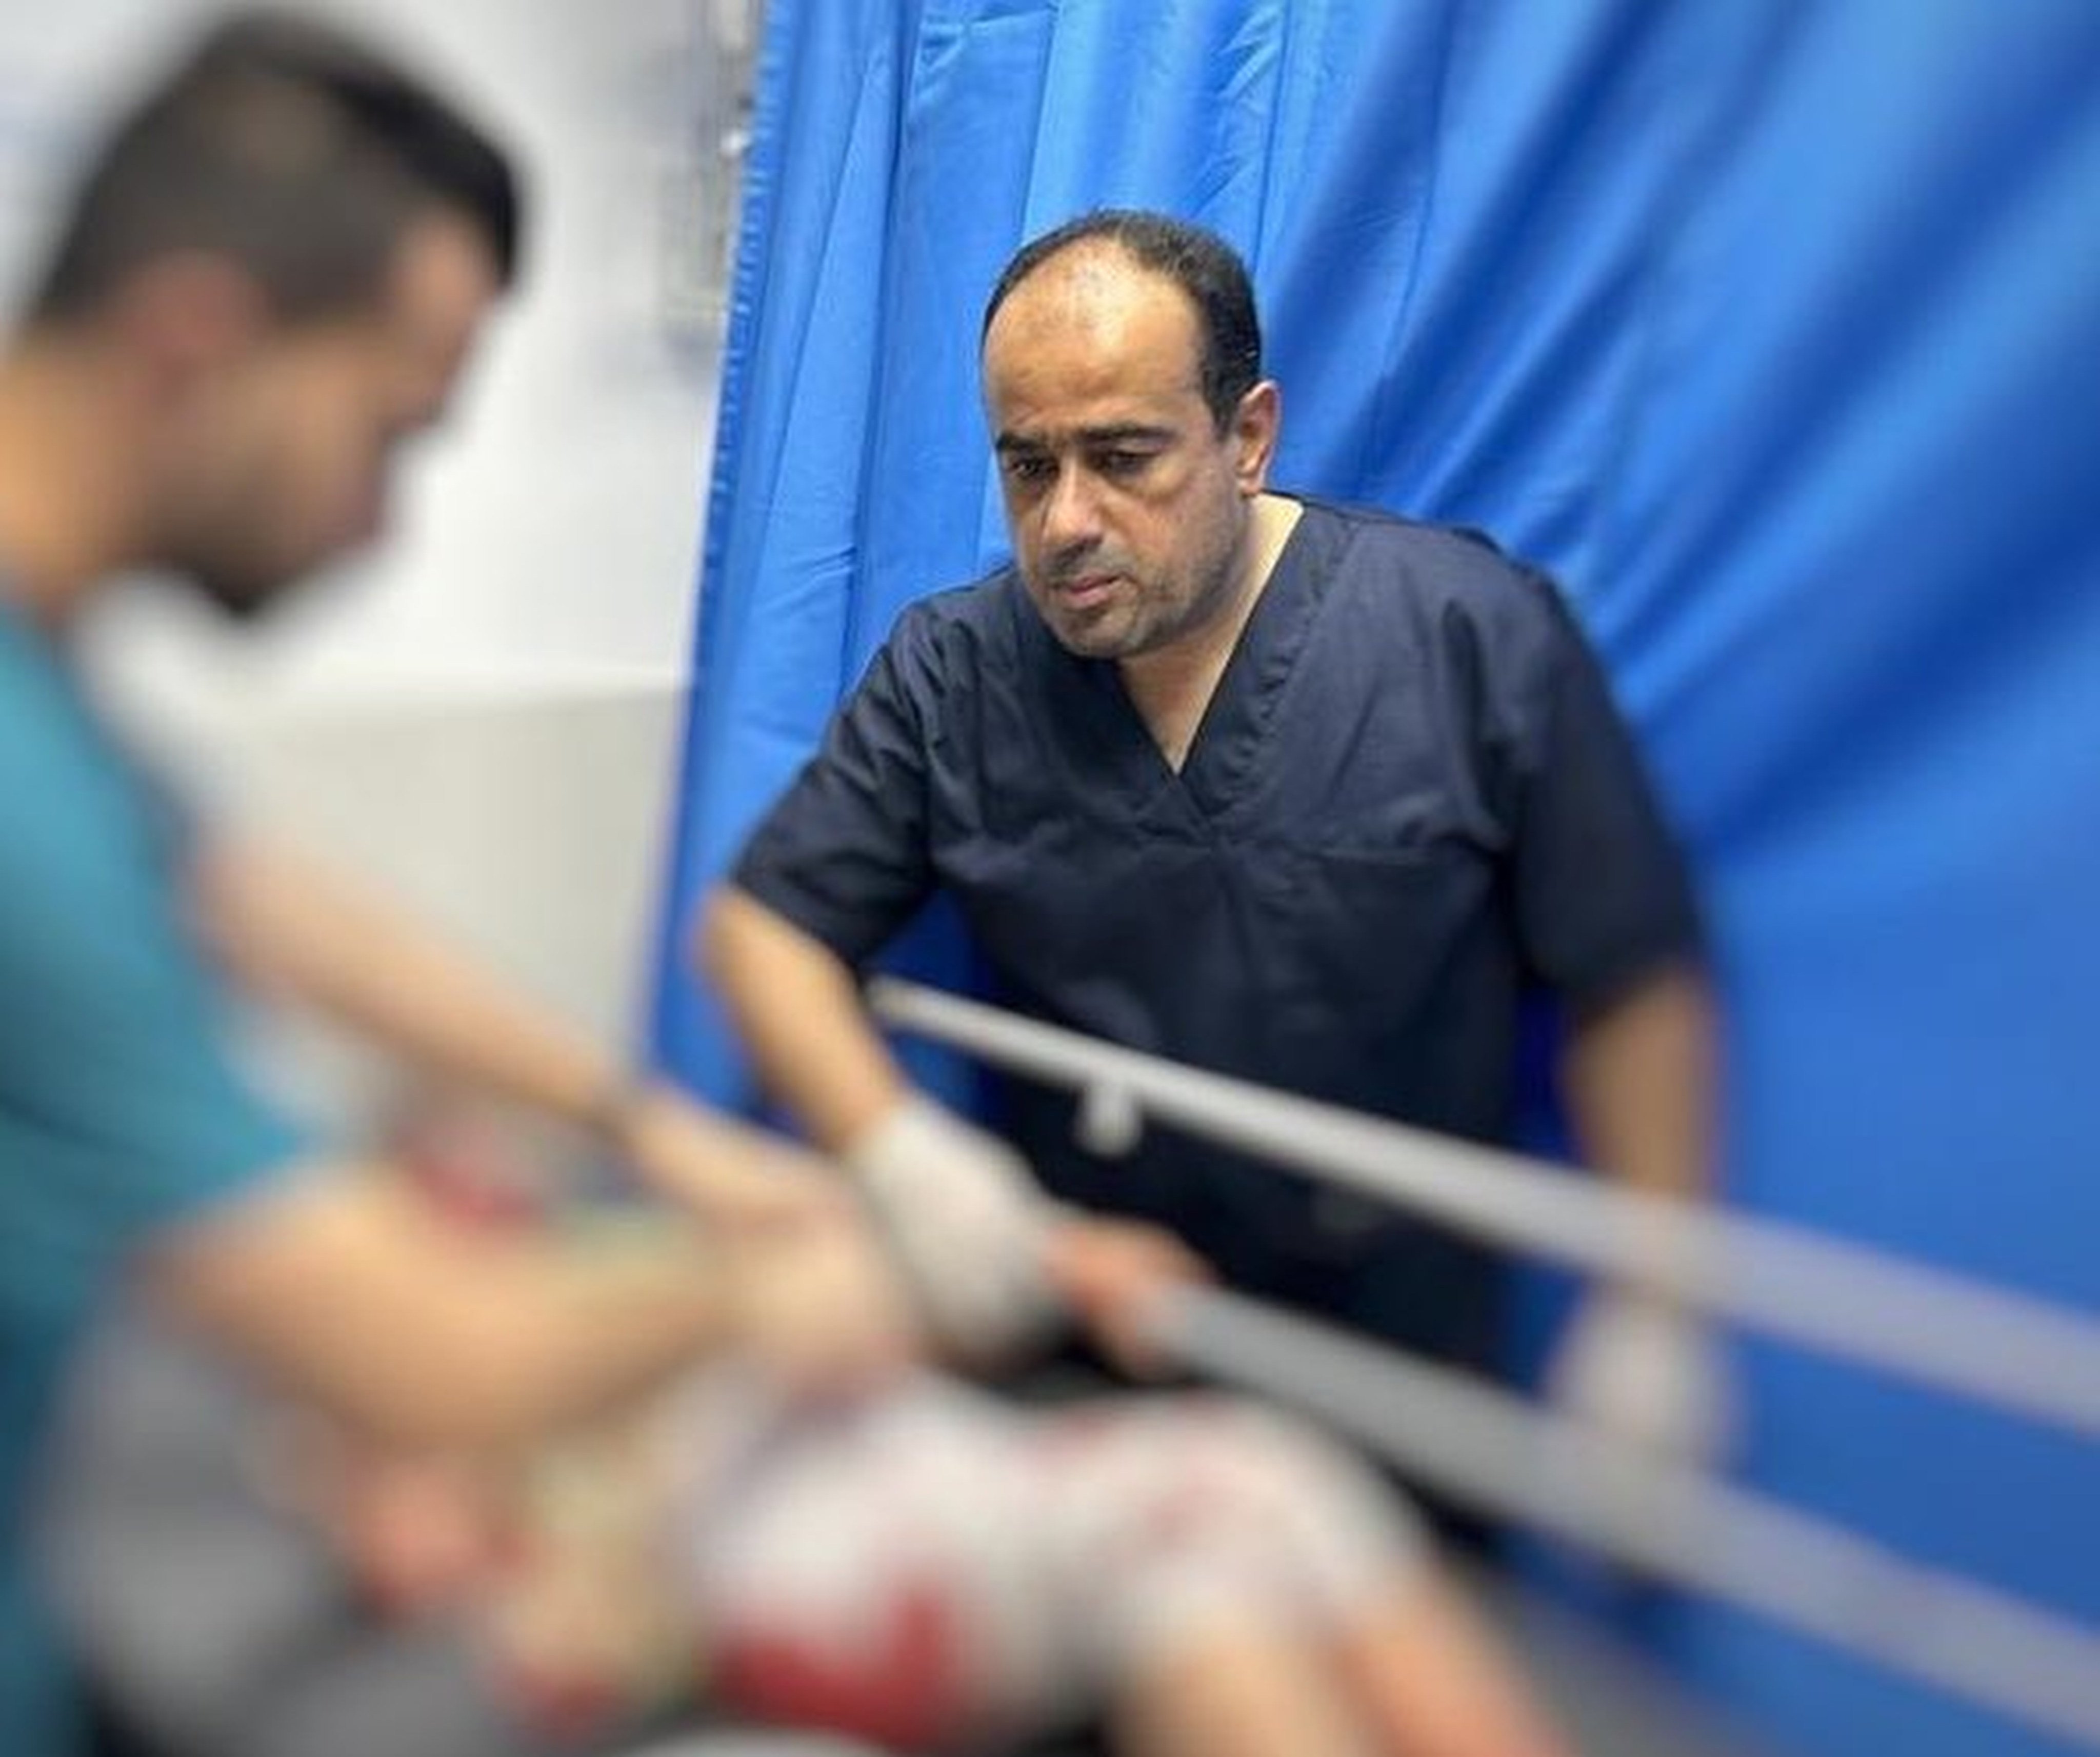 Israel released the director of Gaza’s main hospital, Mohammed Abu Selmia, on Monday, seven months after the military raided the facility over allegations it was being used as a Hamas command centre. Photo: Handout